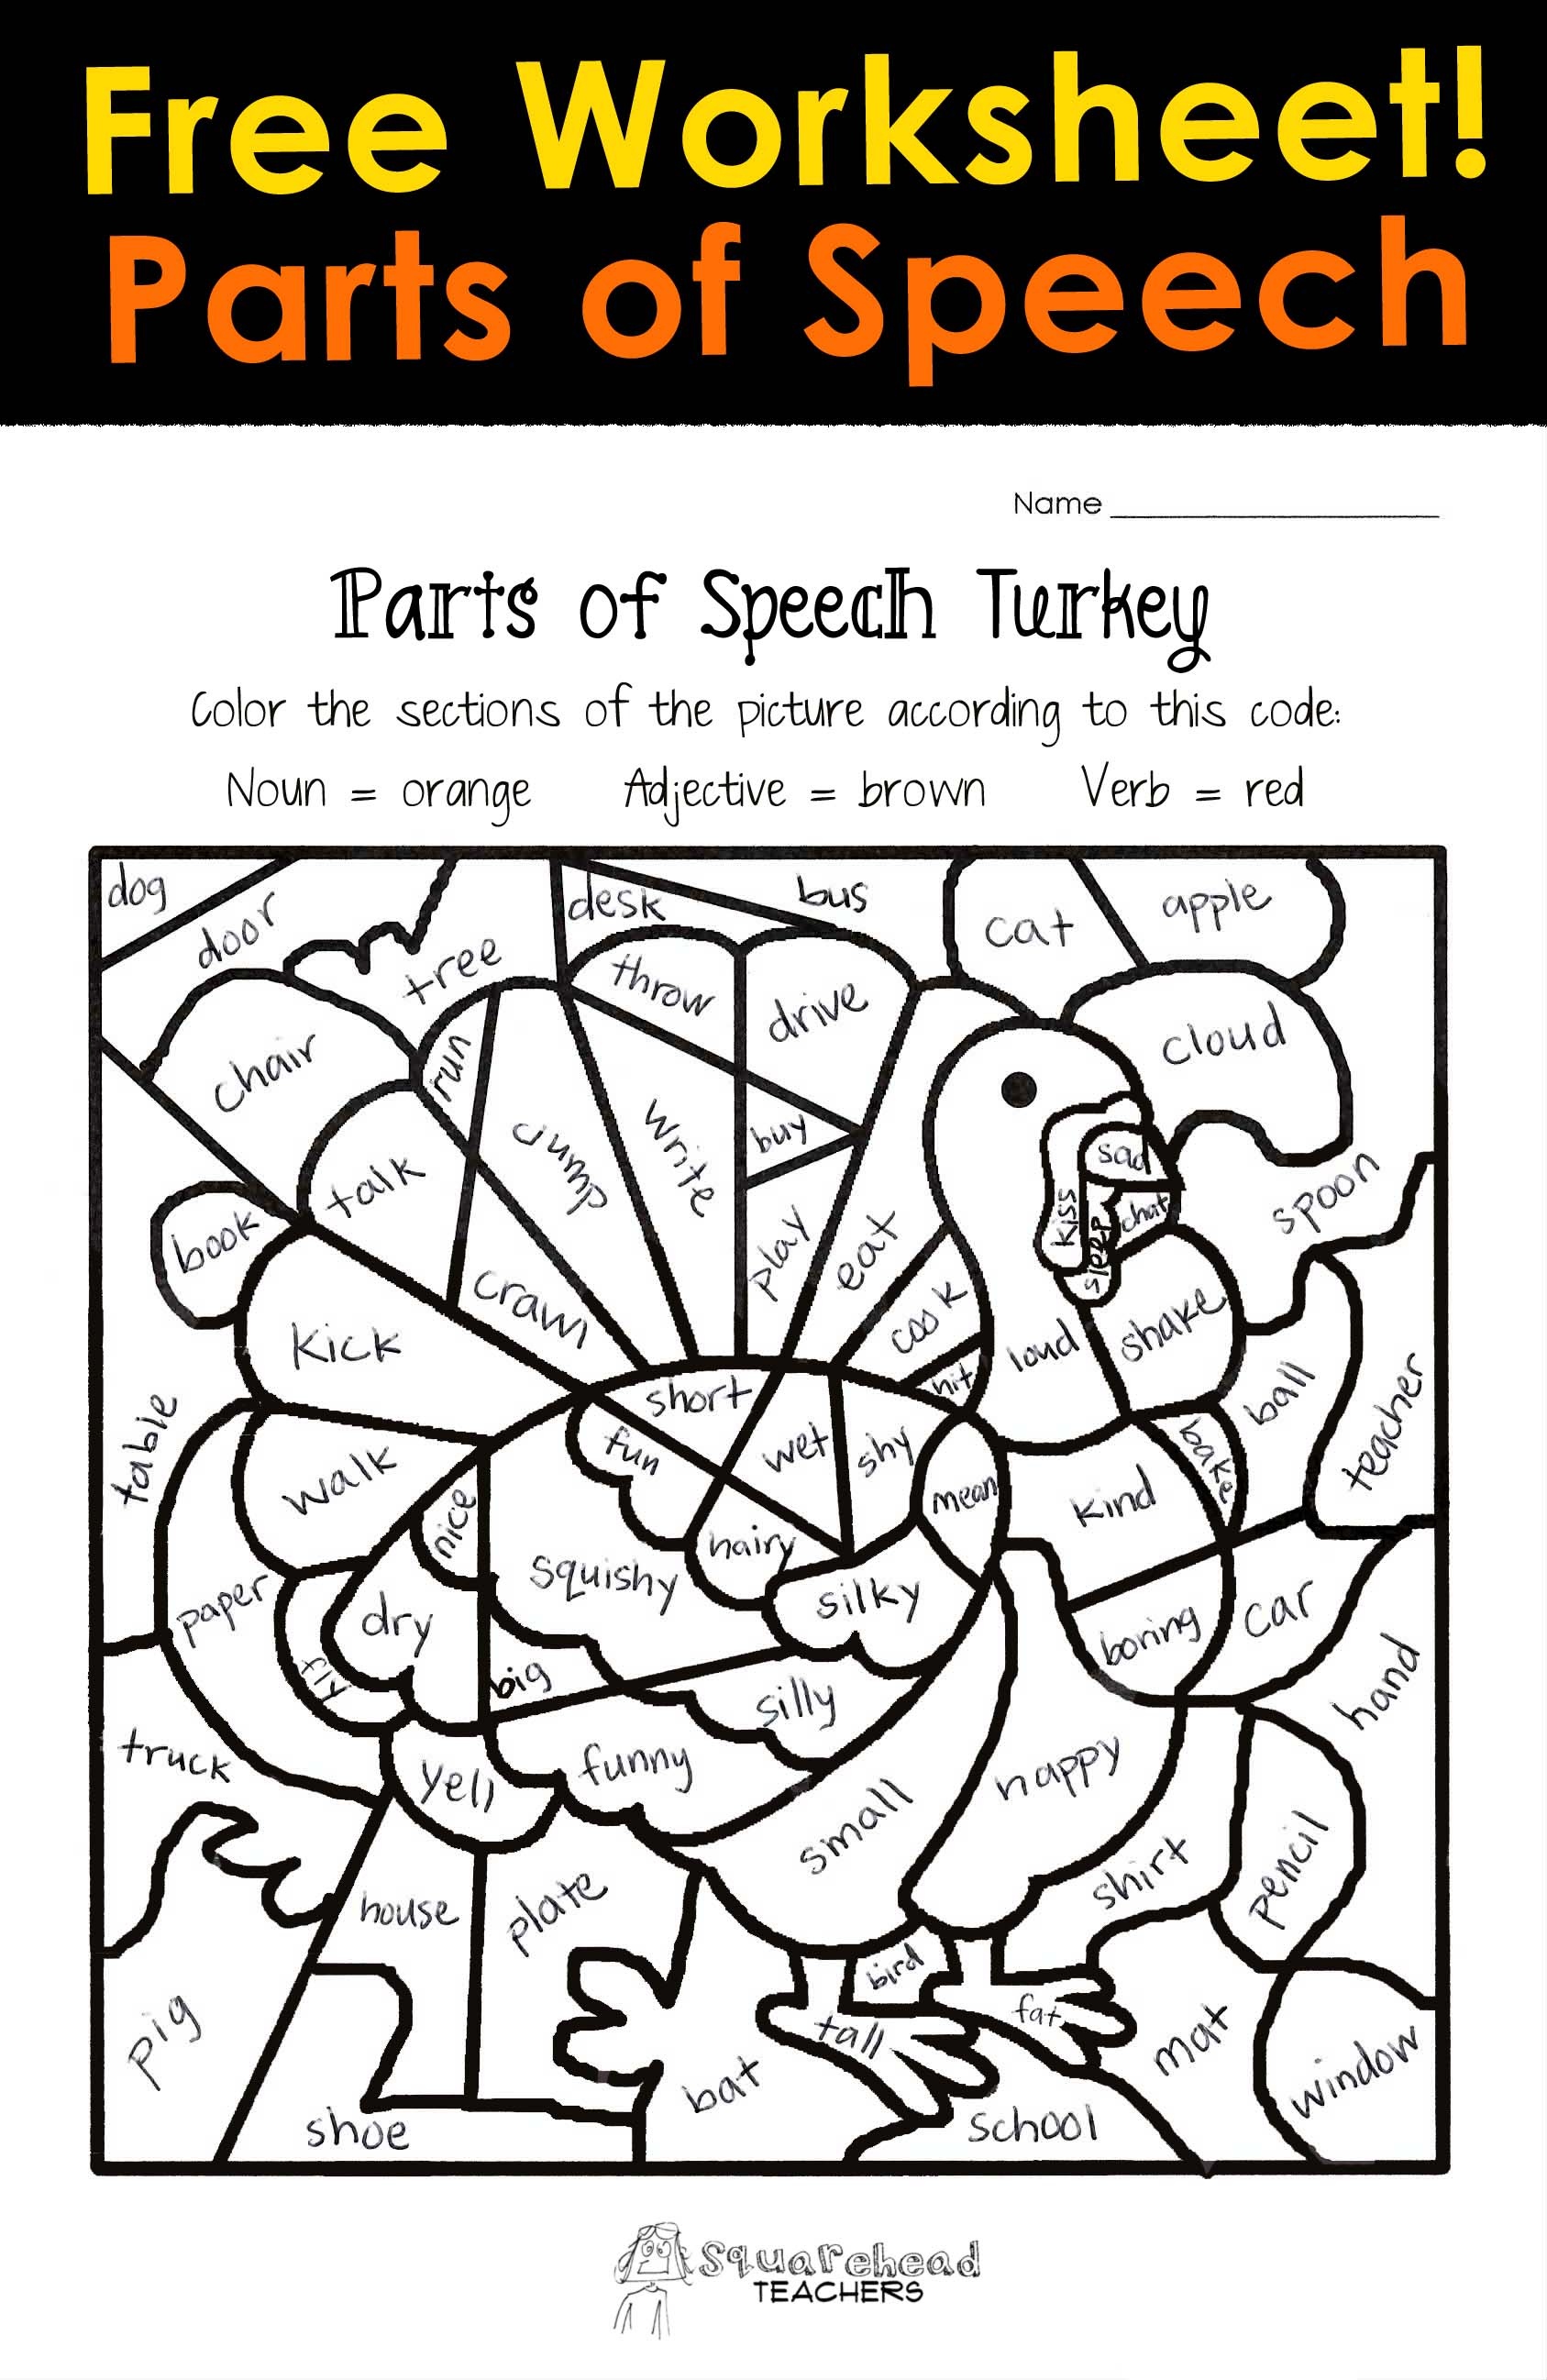 Thanksgiving Parts Of Speech Worksheet | Squarehead Teachers - Free Printable Thanksgiving Worksheets For Middle School